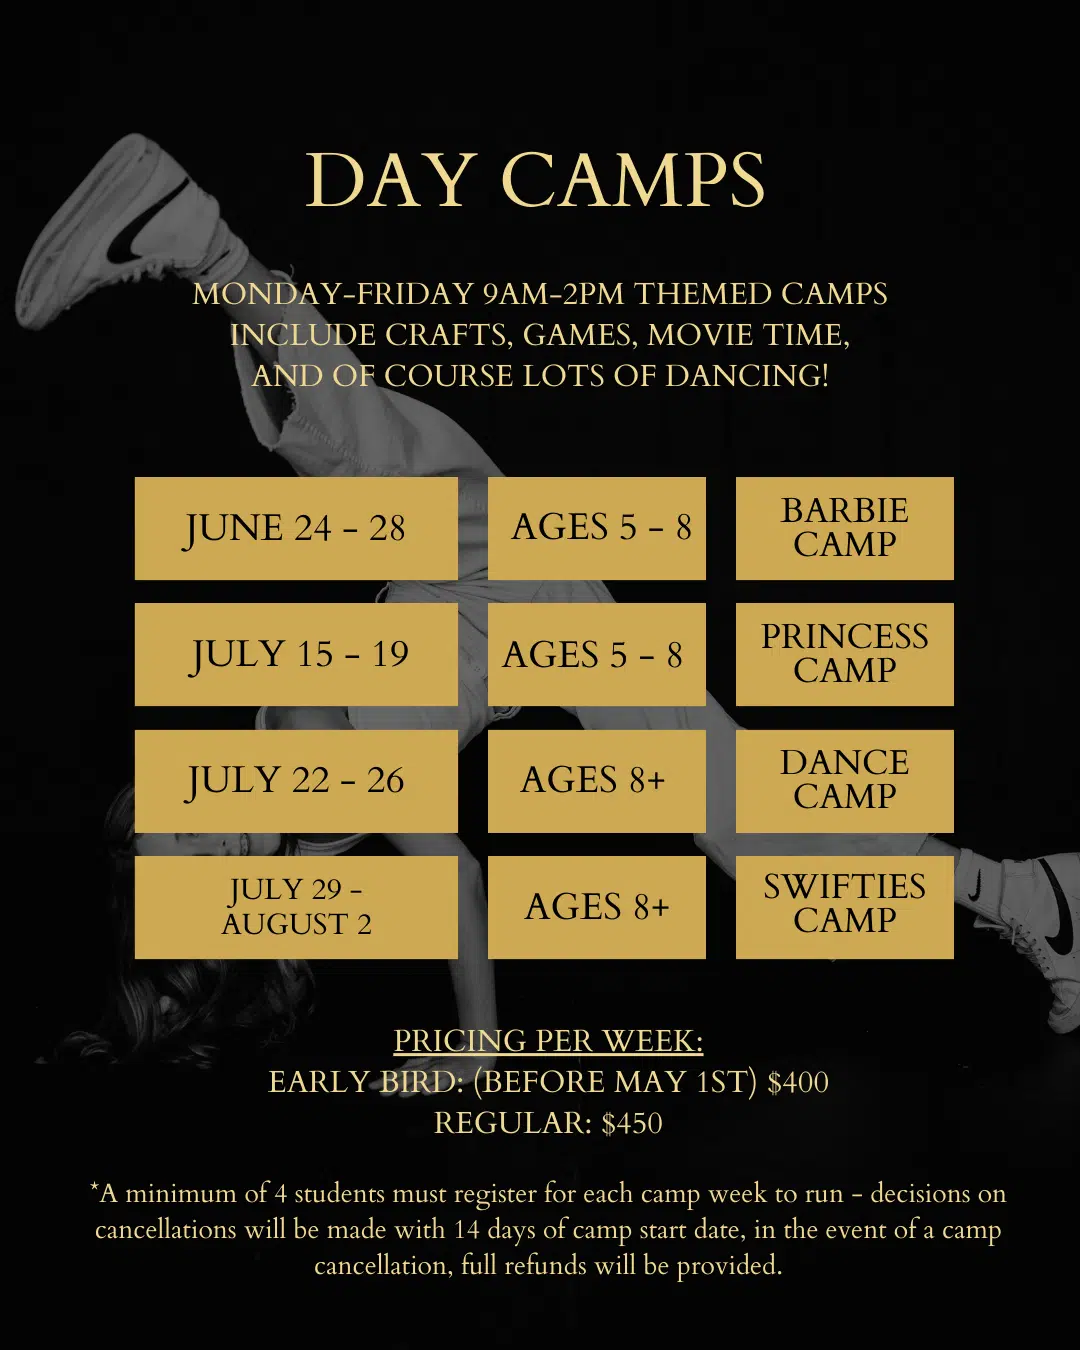 Day Camps from Monday to Friday 9 a.m. to 2 p.m. at Holy City Dance Center